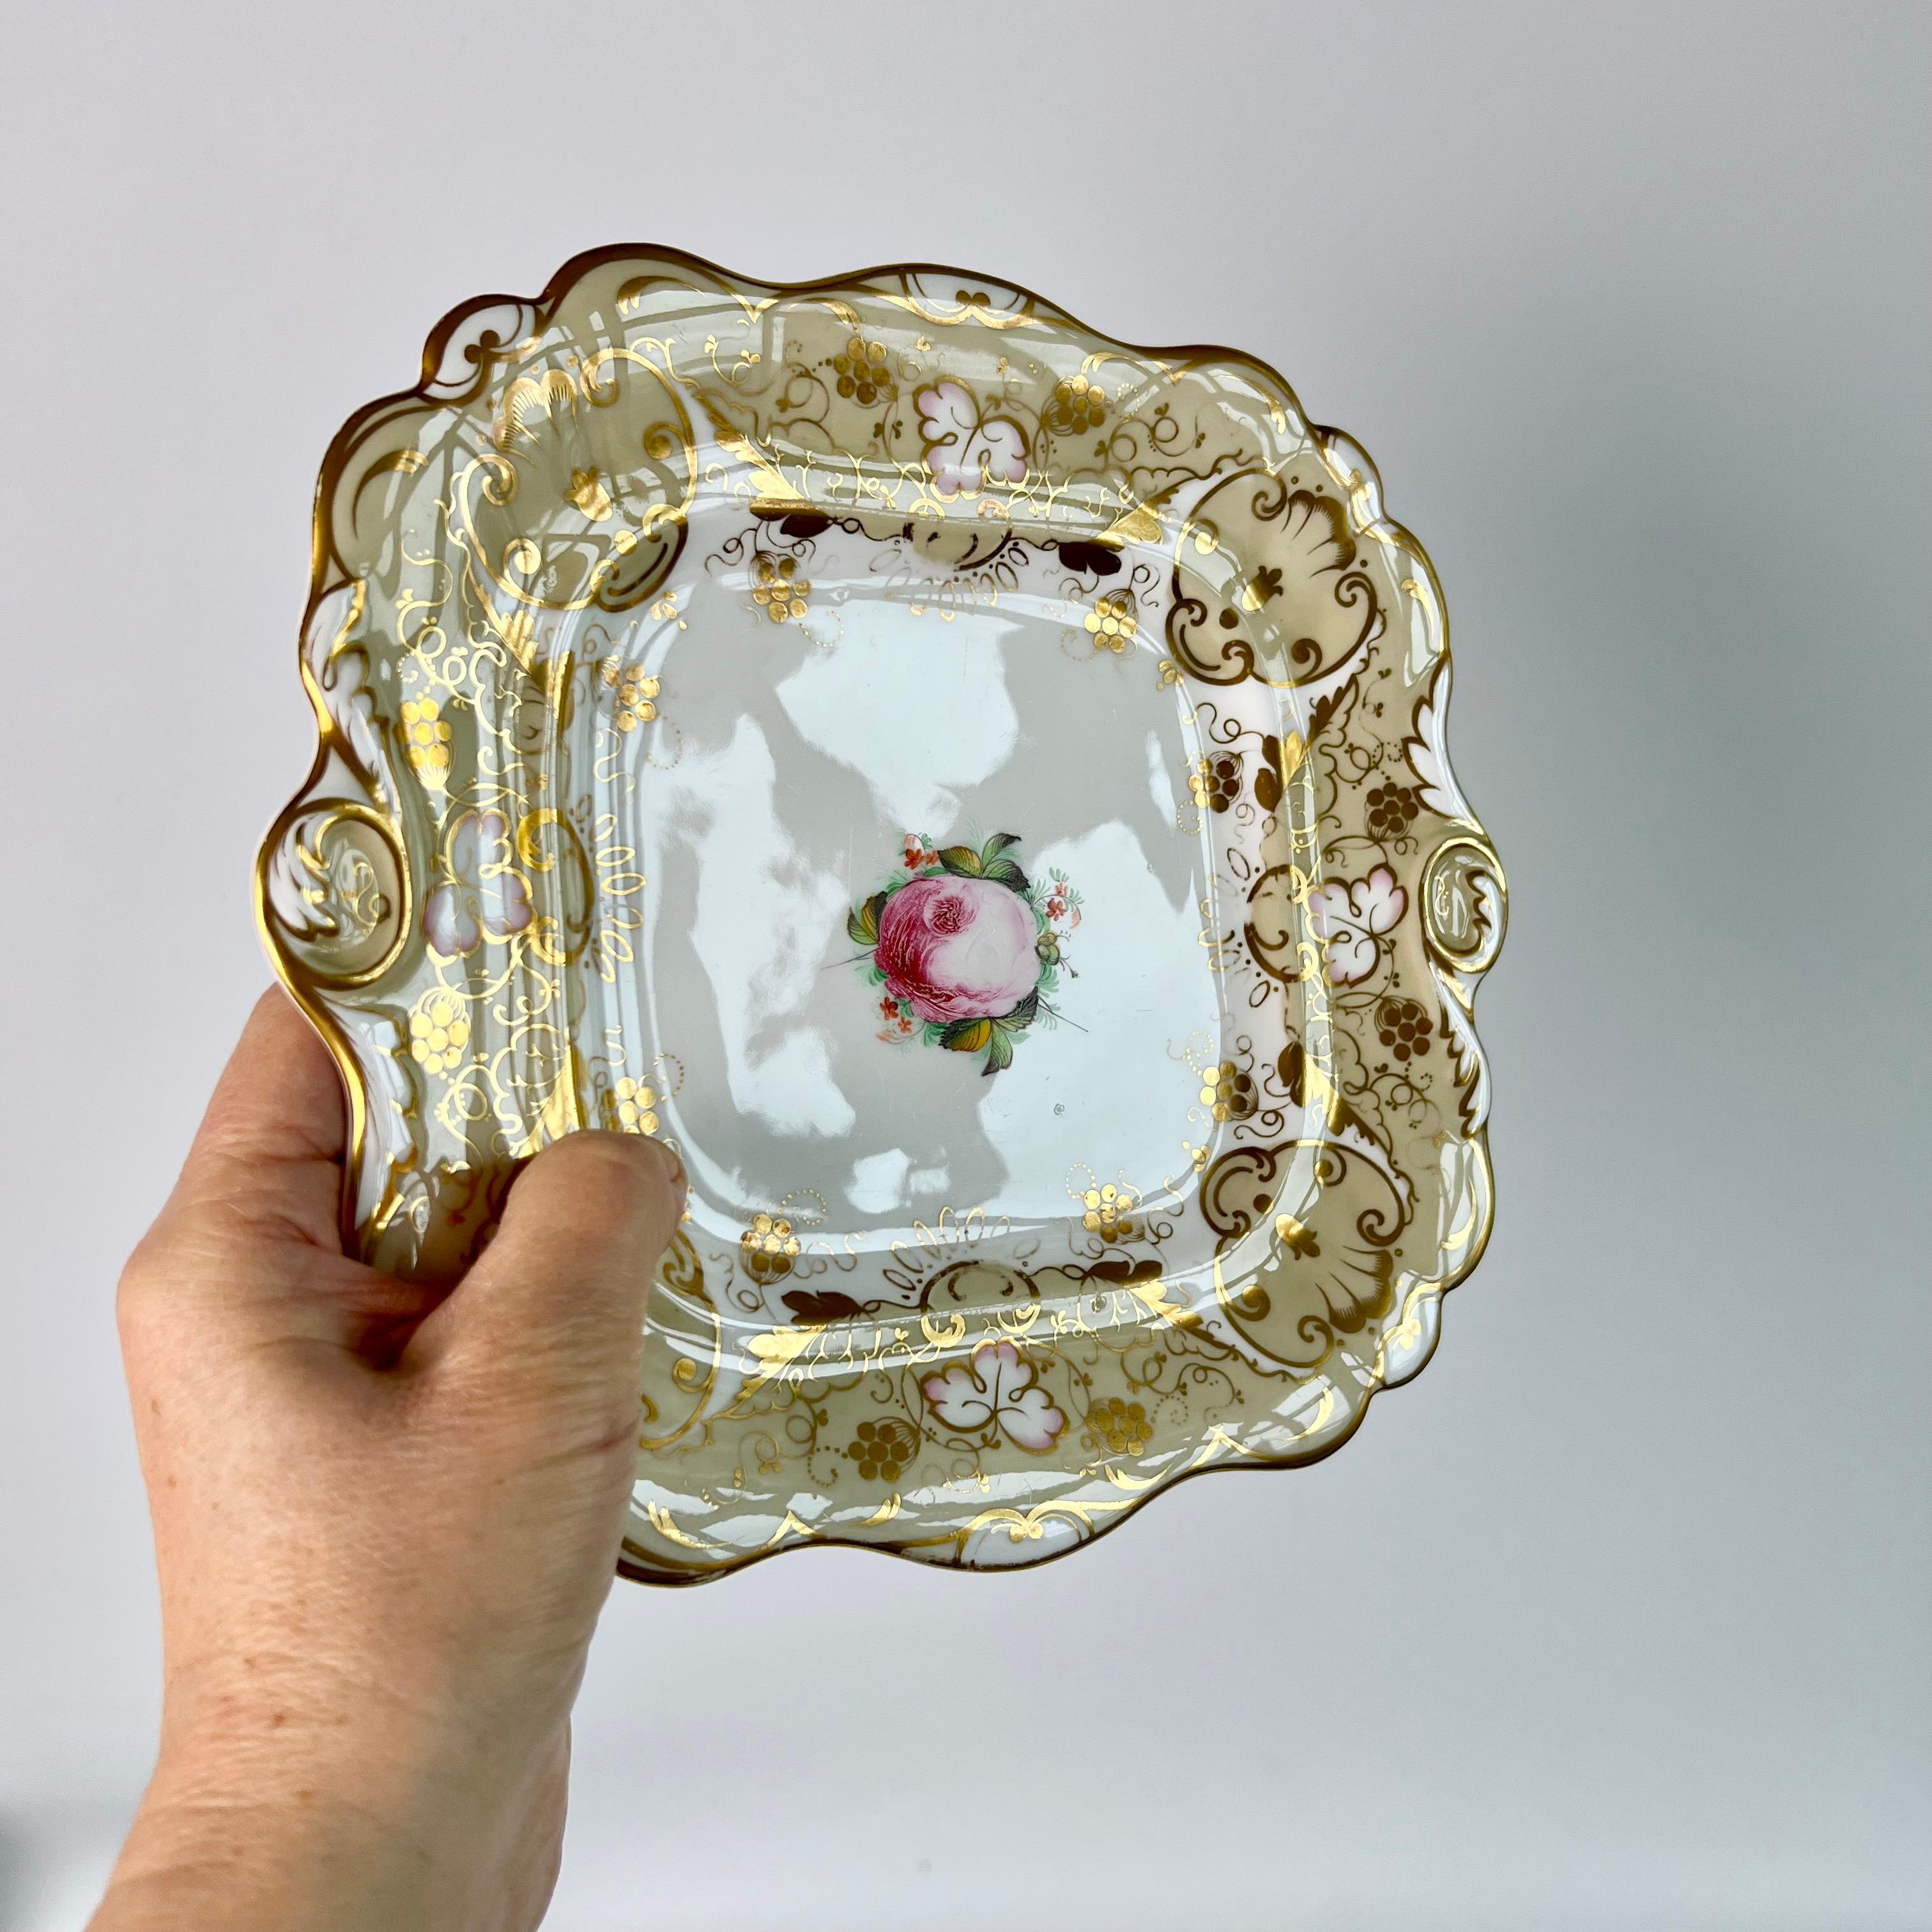 This is a beautiful cake plate from about 1830, made by Hilditch. The plate has warm beige ground with an elaborate gilt pattern, and a beautiful pink cabbage rose in the centre.

The Hilditch pottery only operated under the name Hilditch from 1811